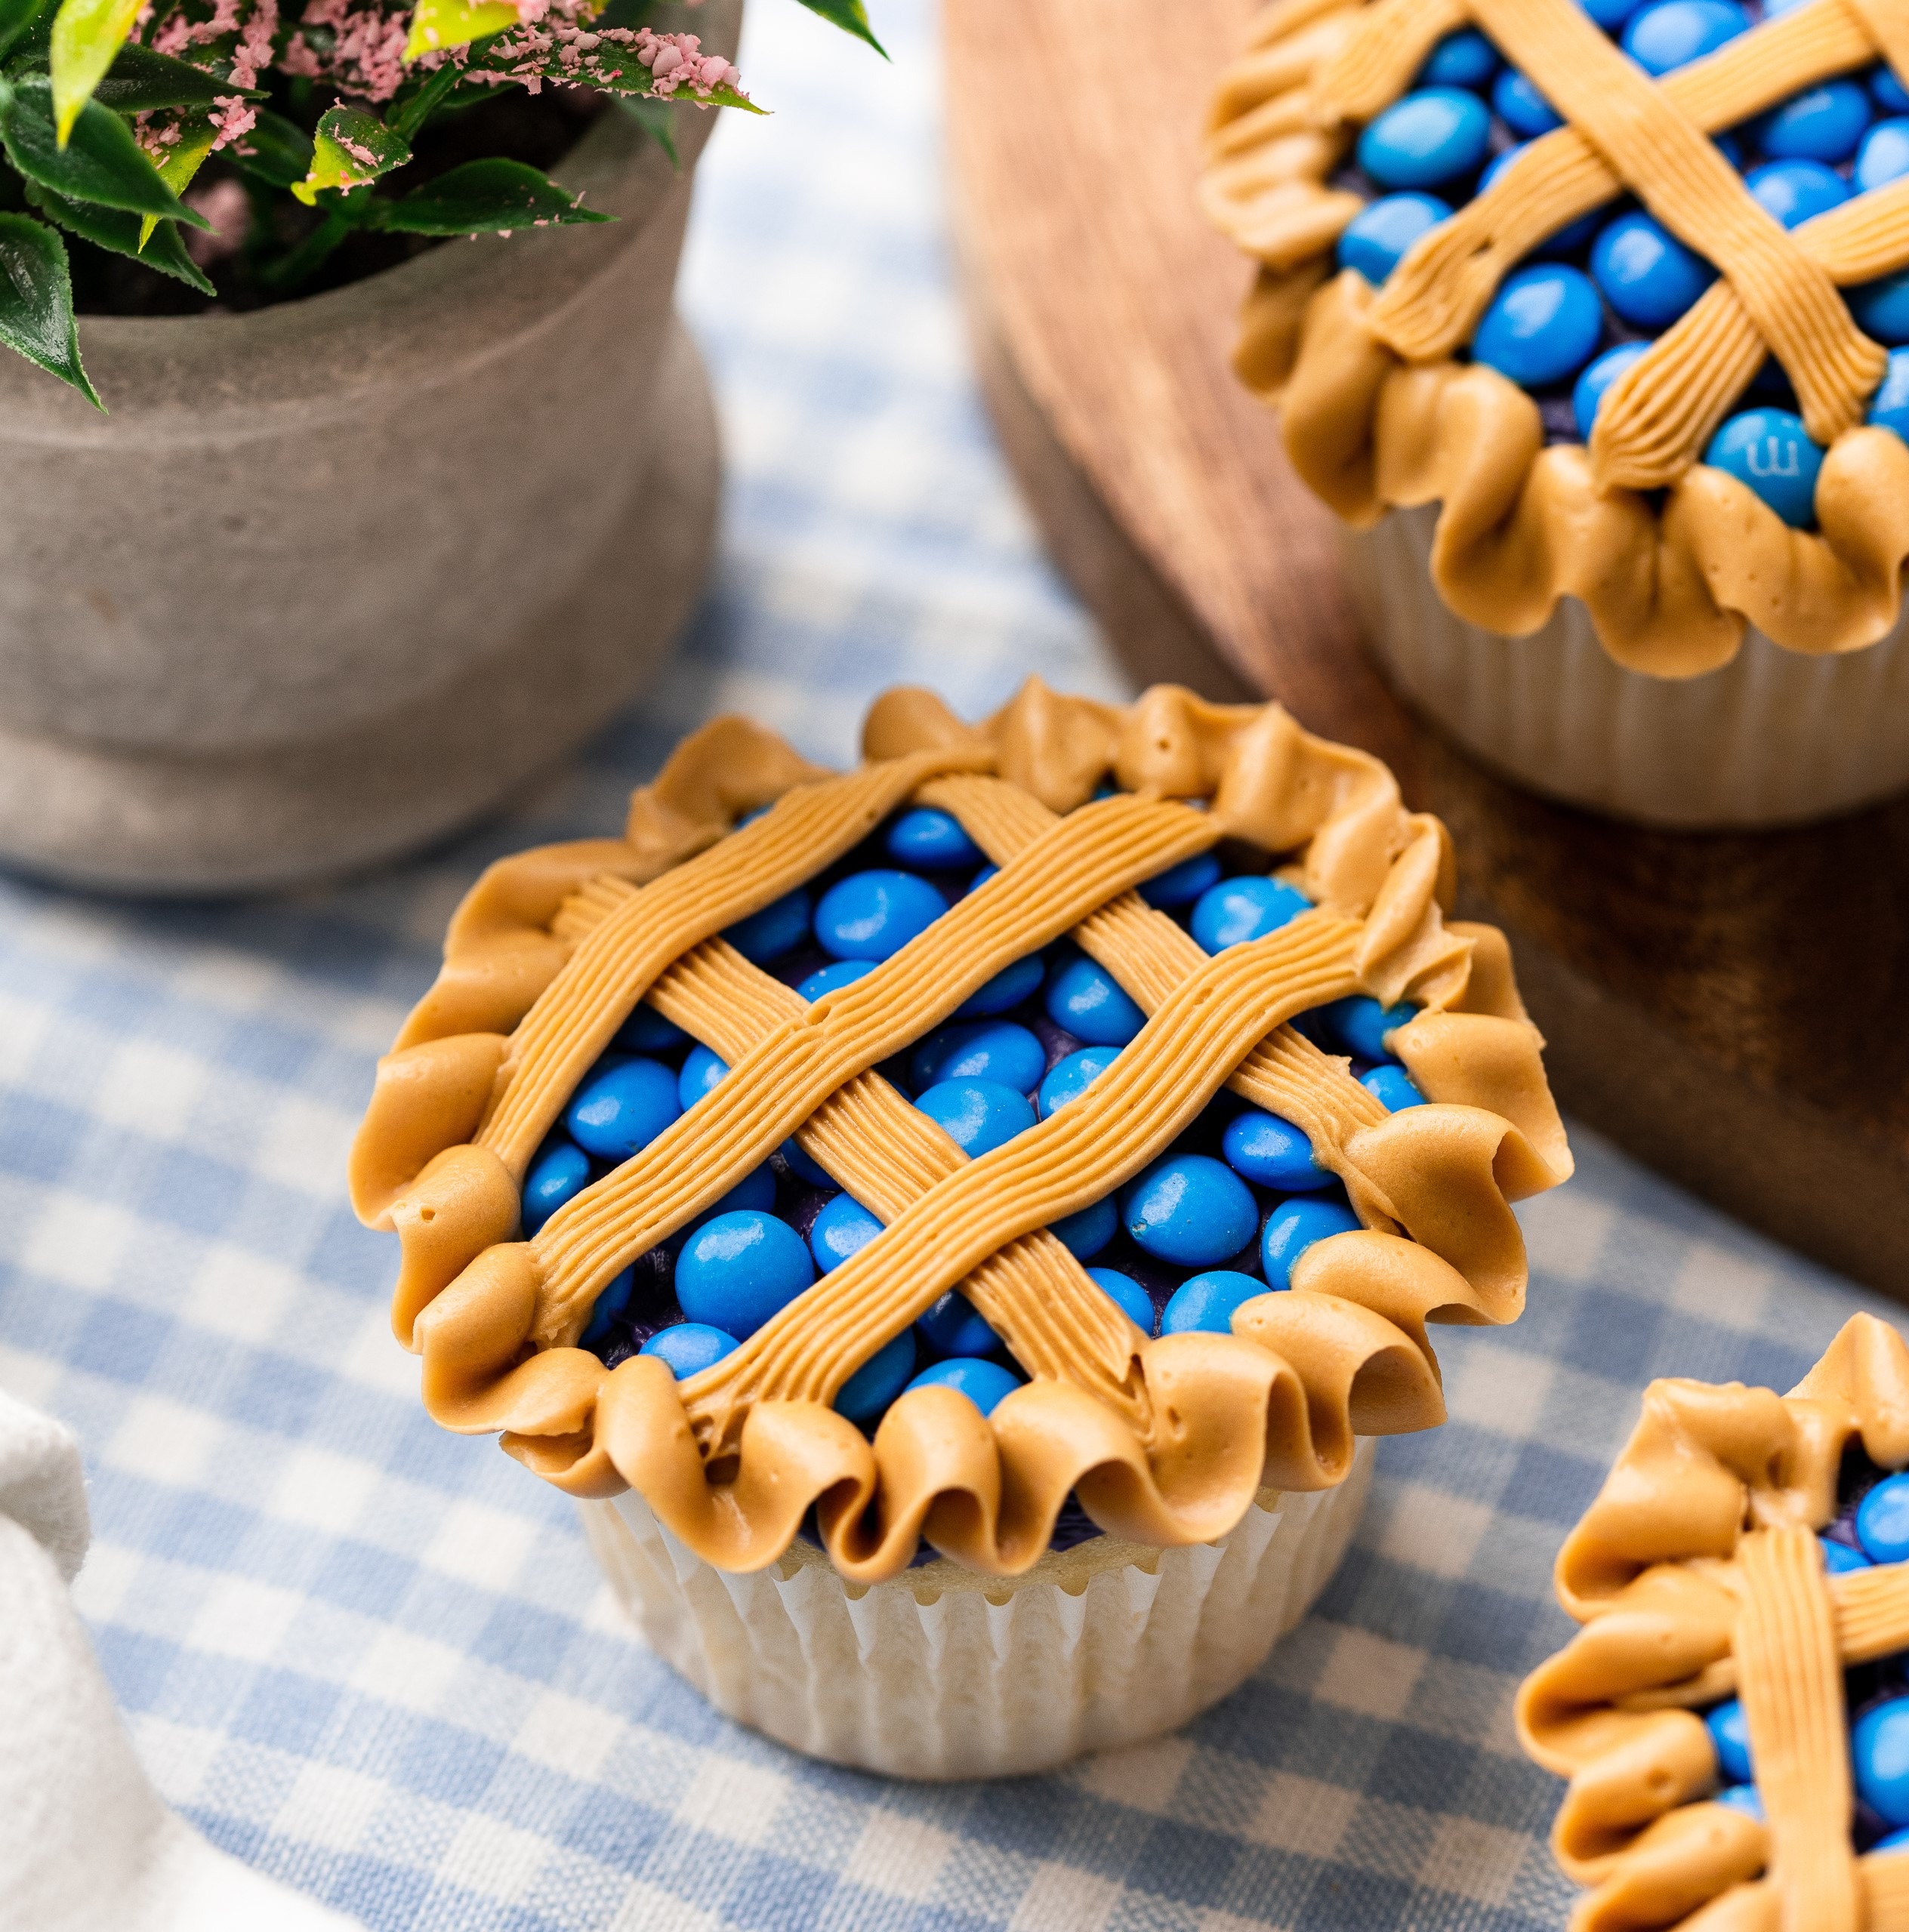 blueberry pie cupcakes on a checkered tablecloth